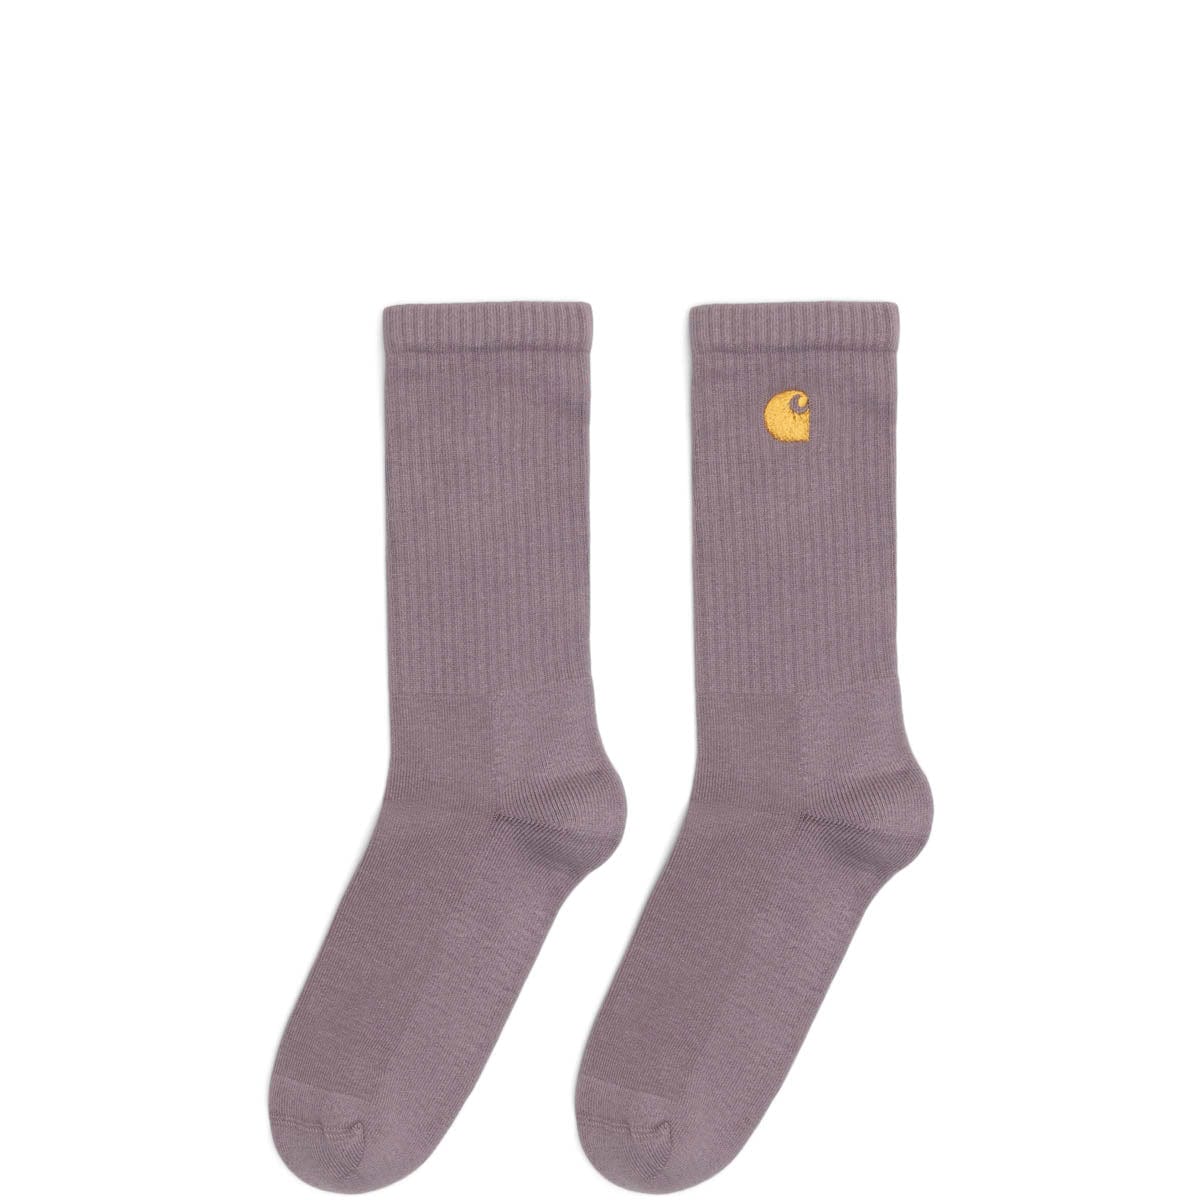 Carhartt WIP Accessories - Soft Accessories - Socks MISTY THISTLE/GOLD / O/S CHASE SOCKS